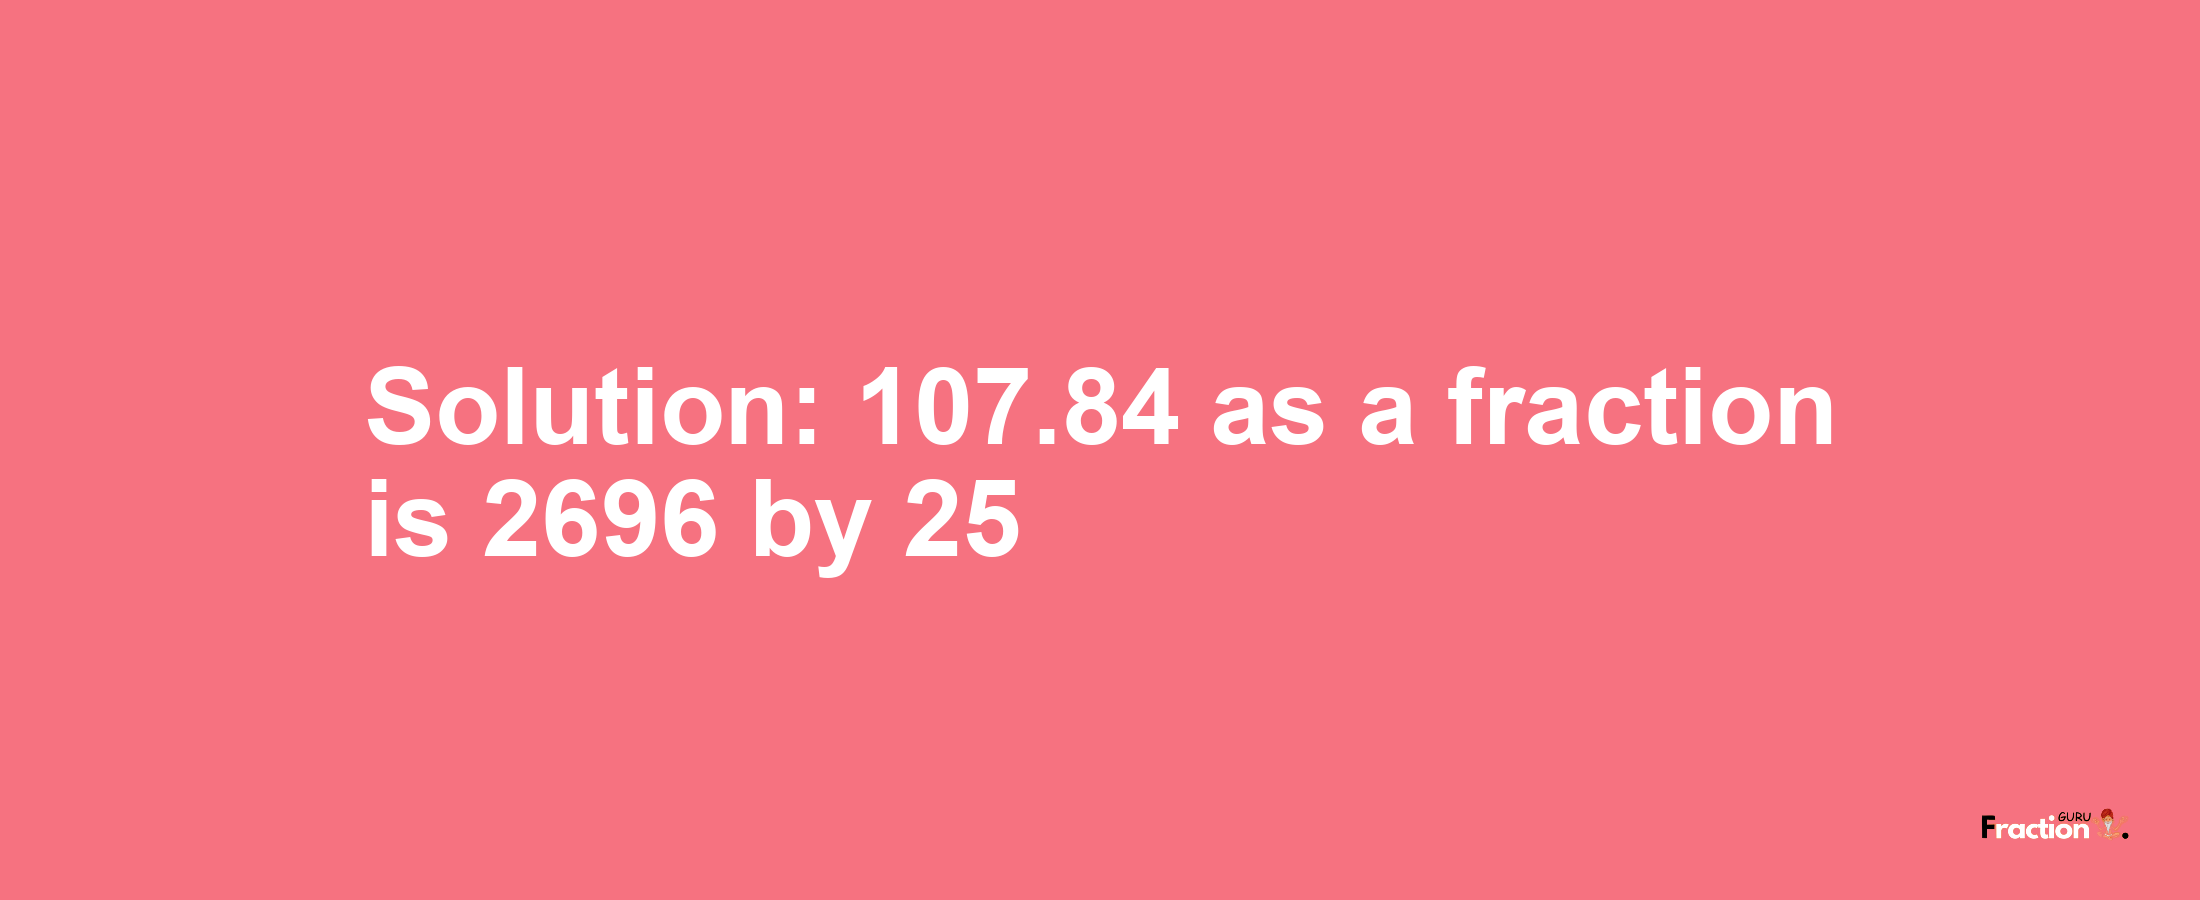 Solution:107.84 as a fraction is 2696/25